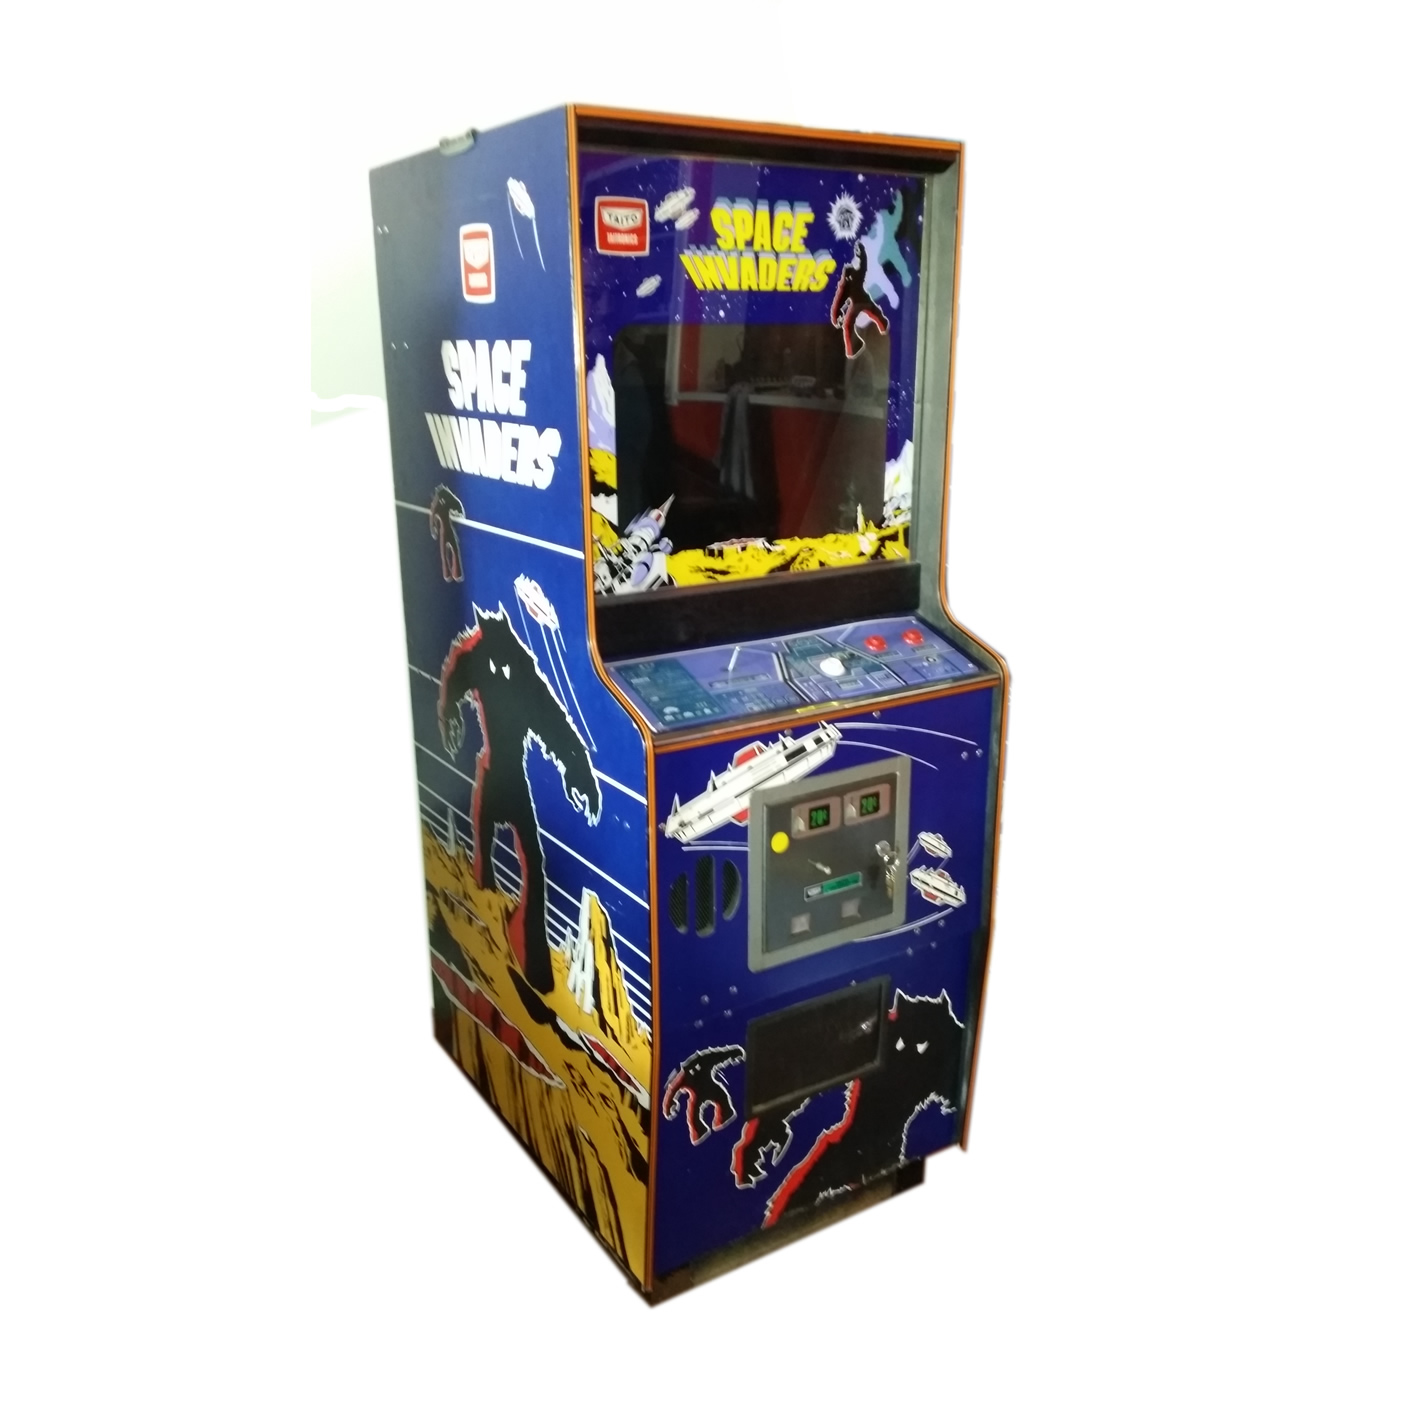 Image result for space invaders arcade machine